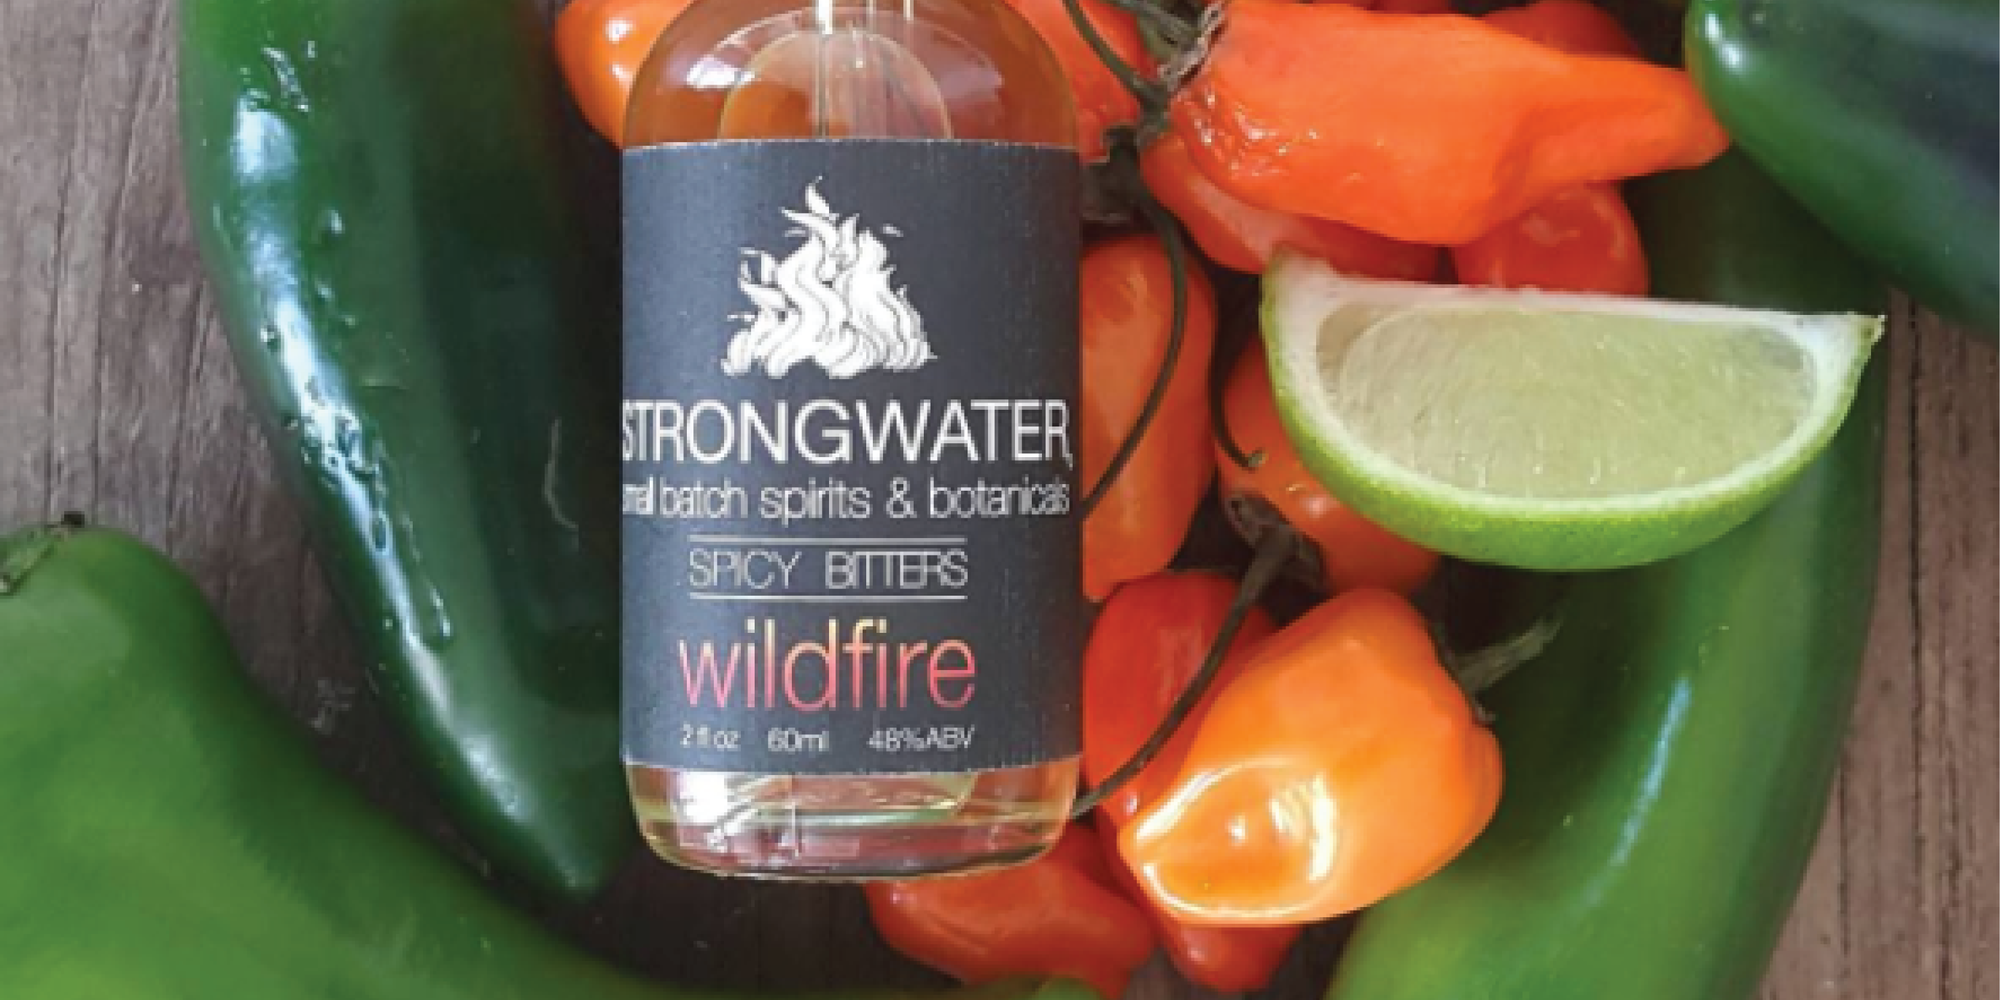 Wildfire Spicy Bitters